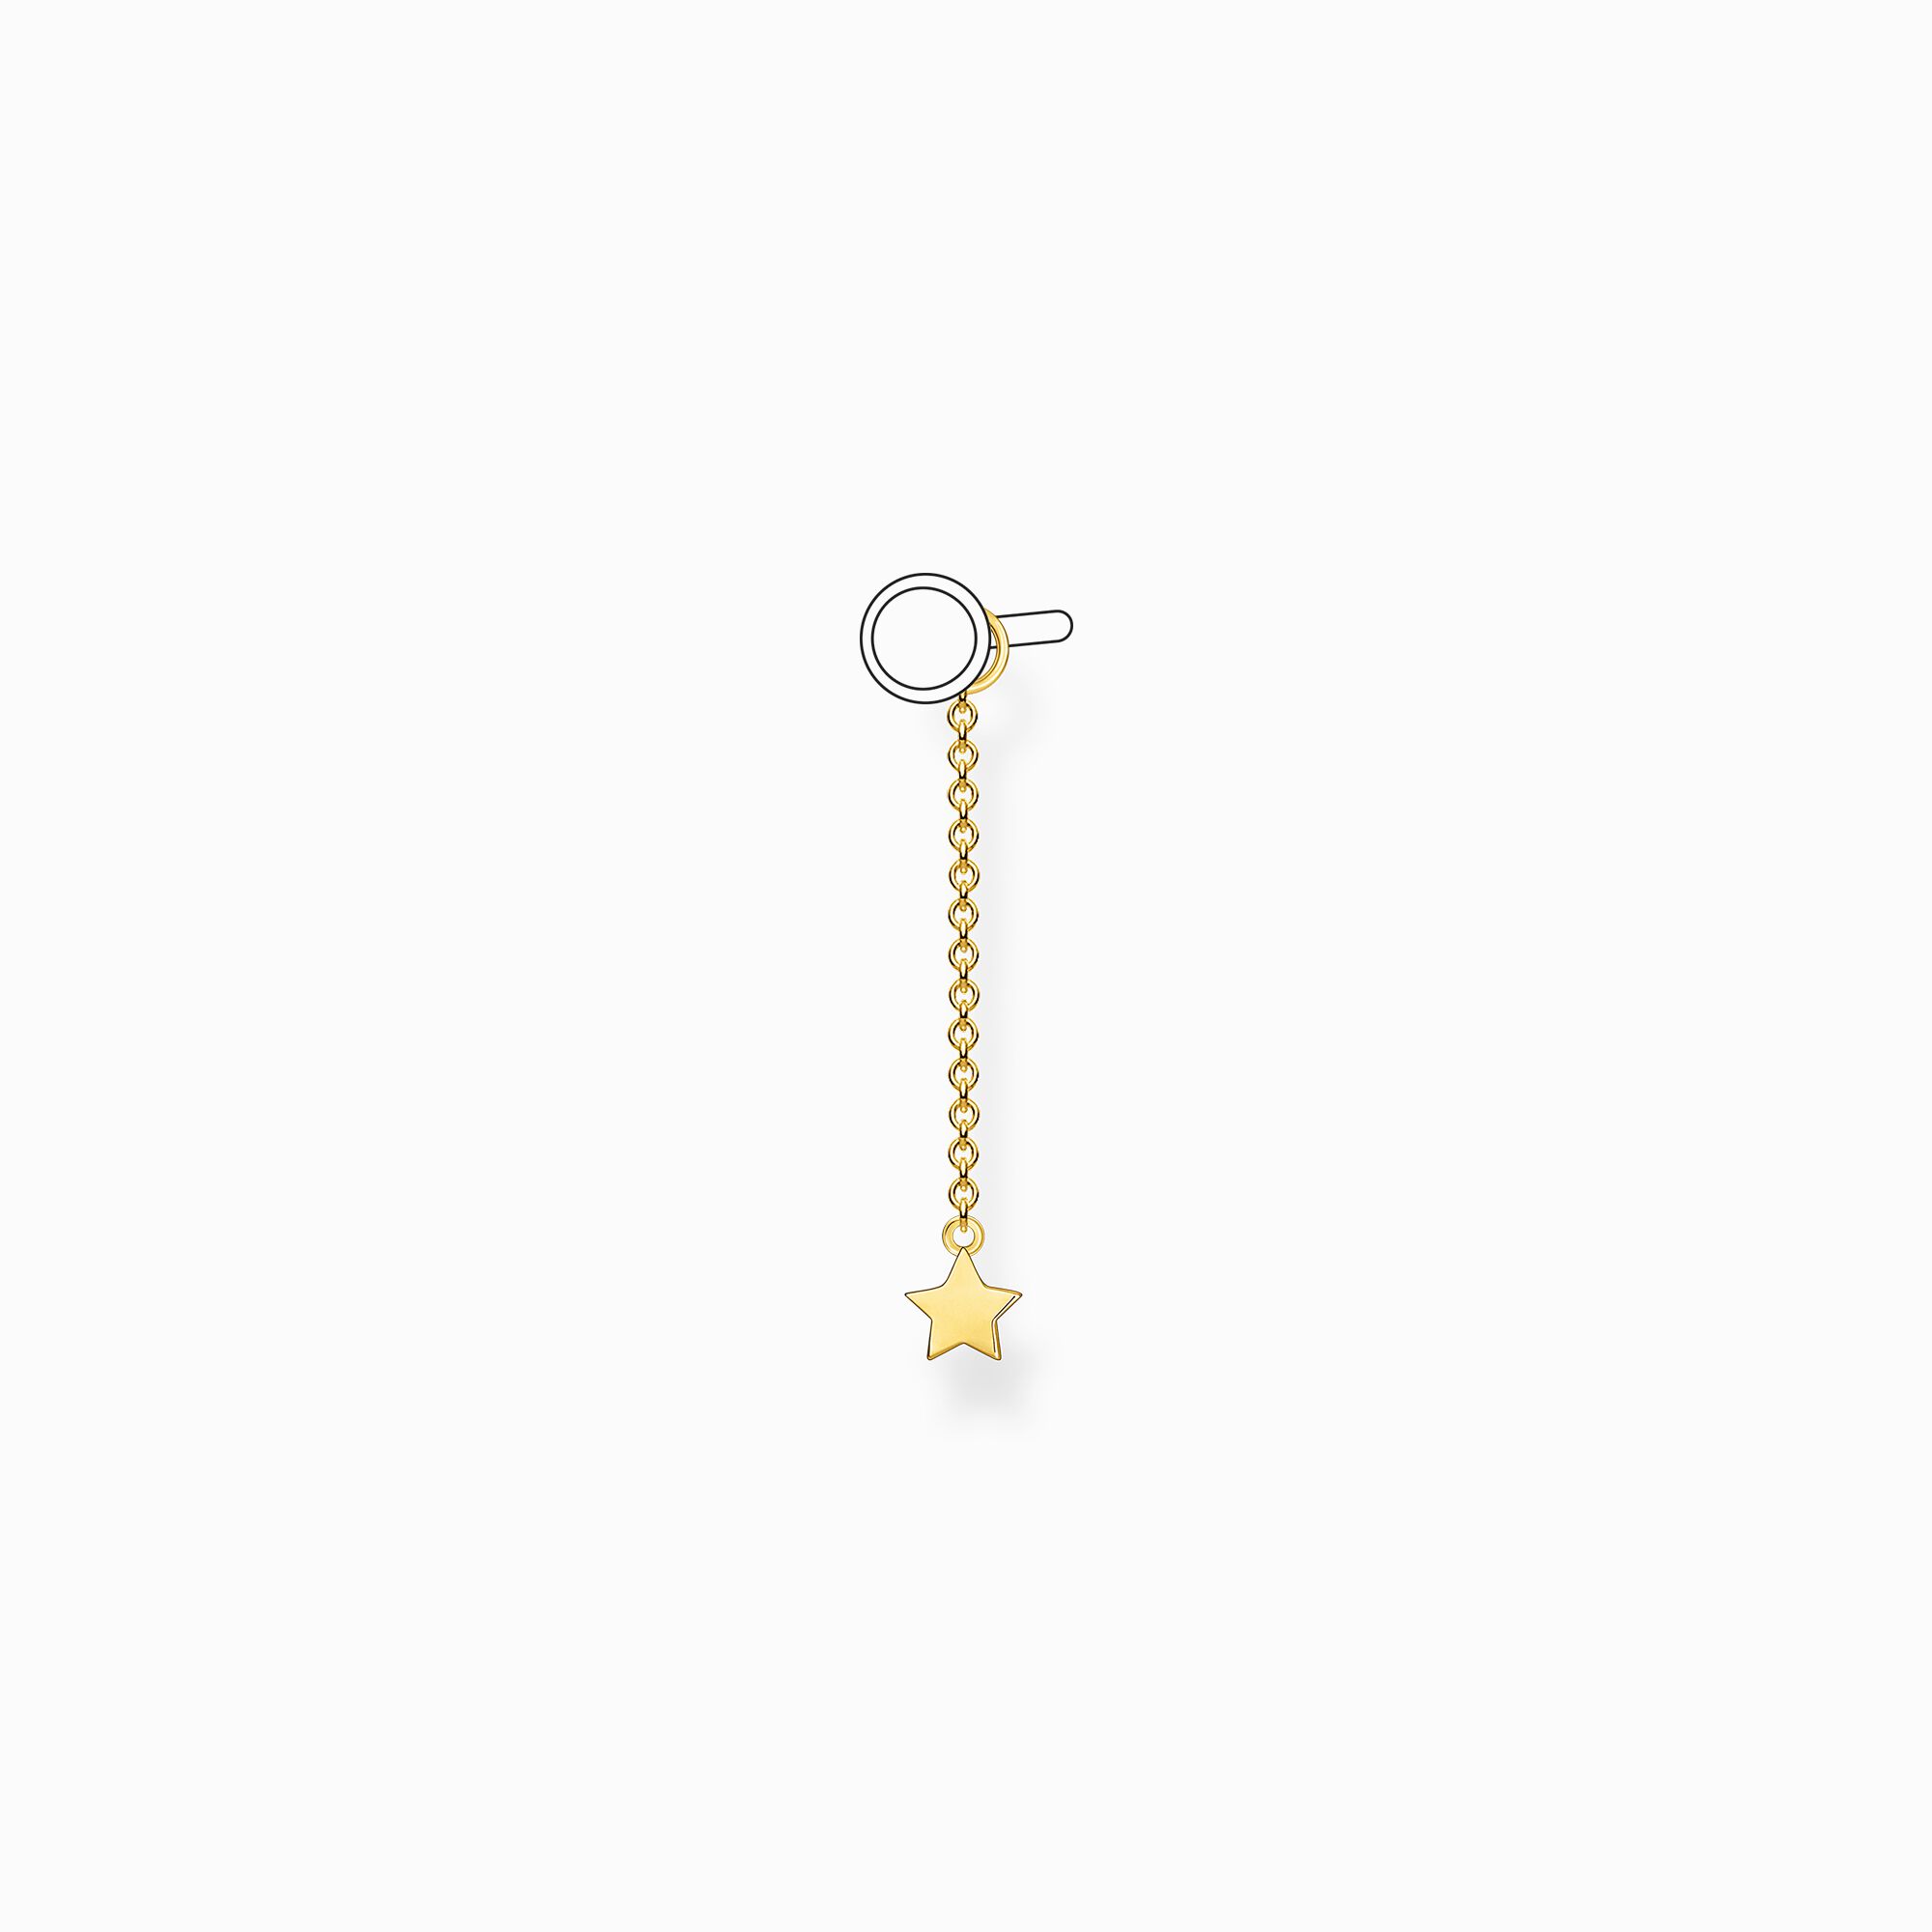 Golden earring pendant with – SABO chain THOMAS